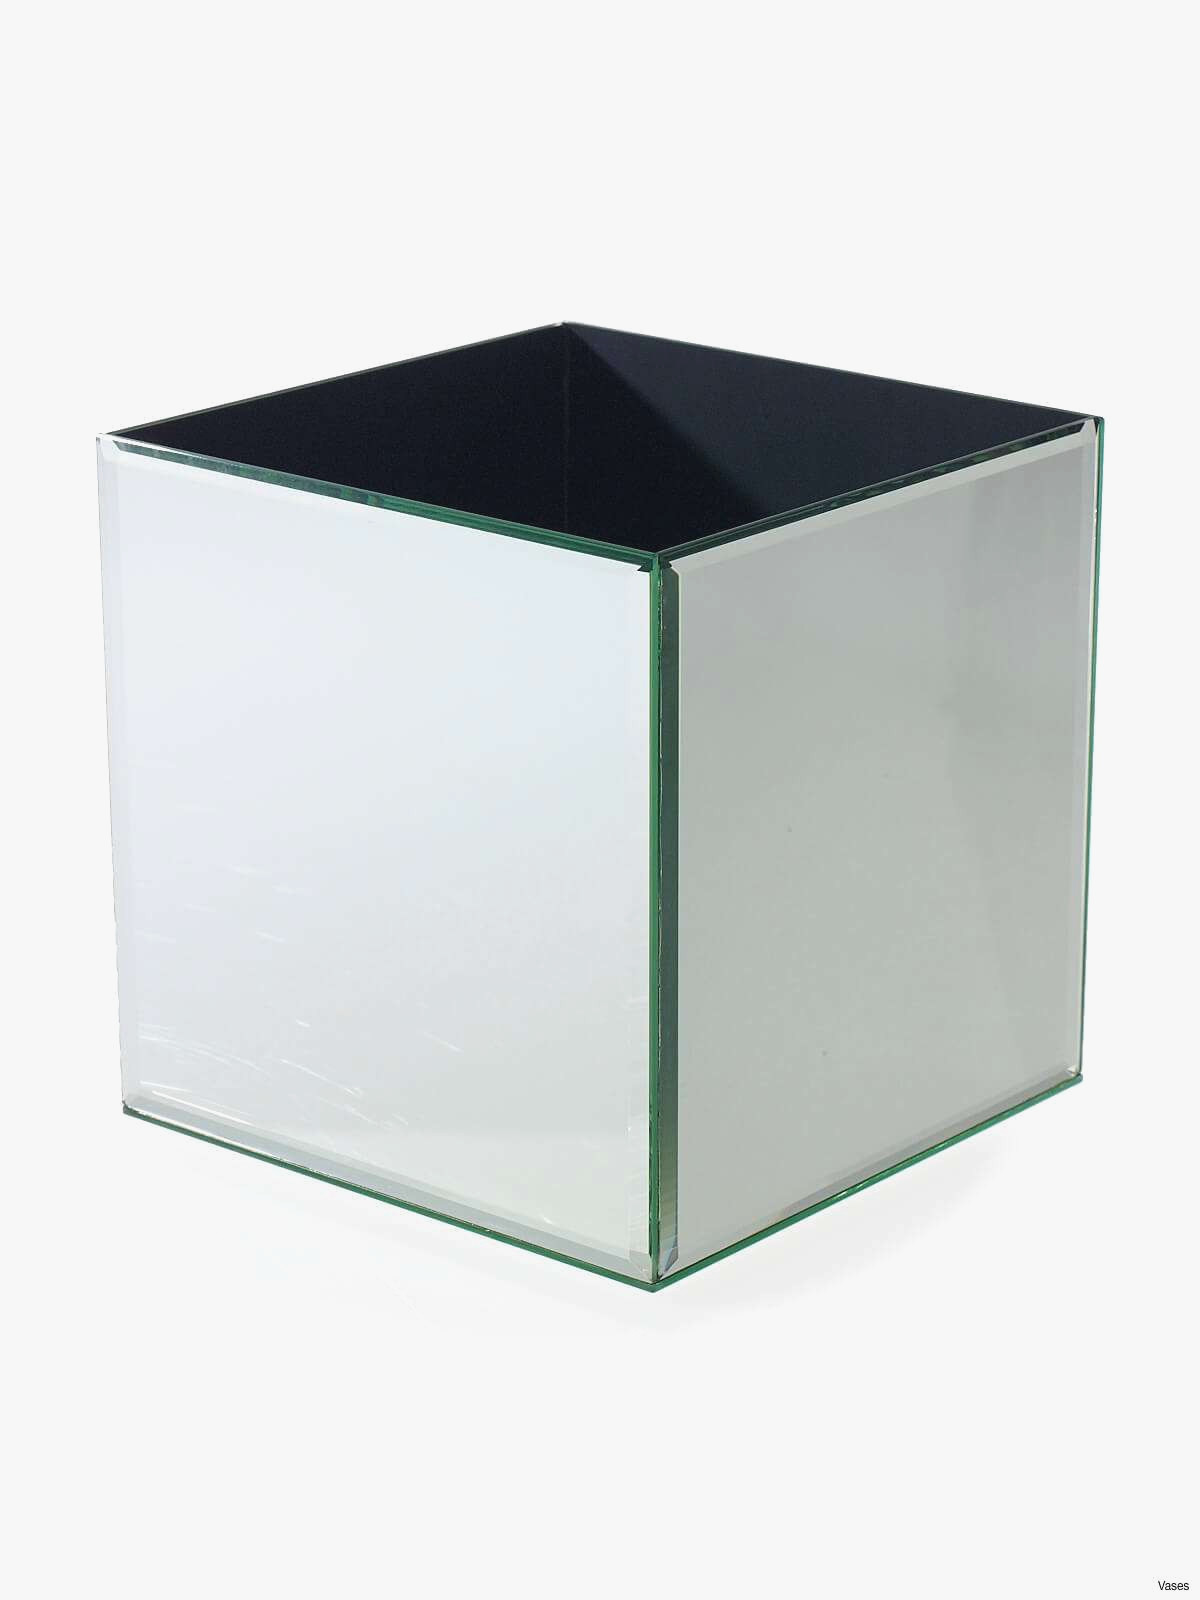 21 attractive Large Plastic Vase 2024 free download large plastic vase of 12 lovely glass centerpieces for tables collection 7p7u table gallery intended for tall vase centerpiece glass centerpieces for tables elegant mirrored square vase 3h v